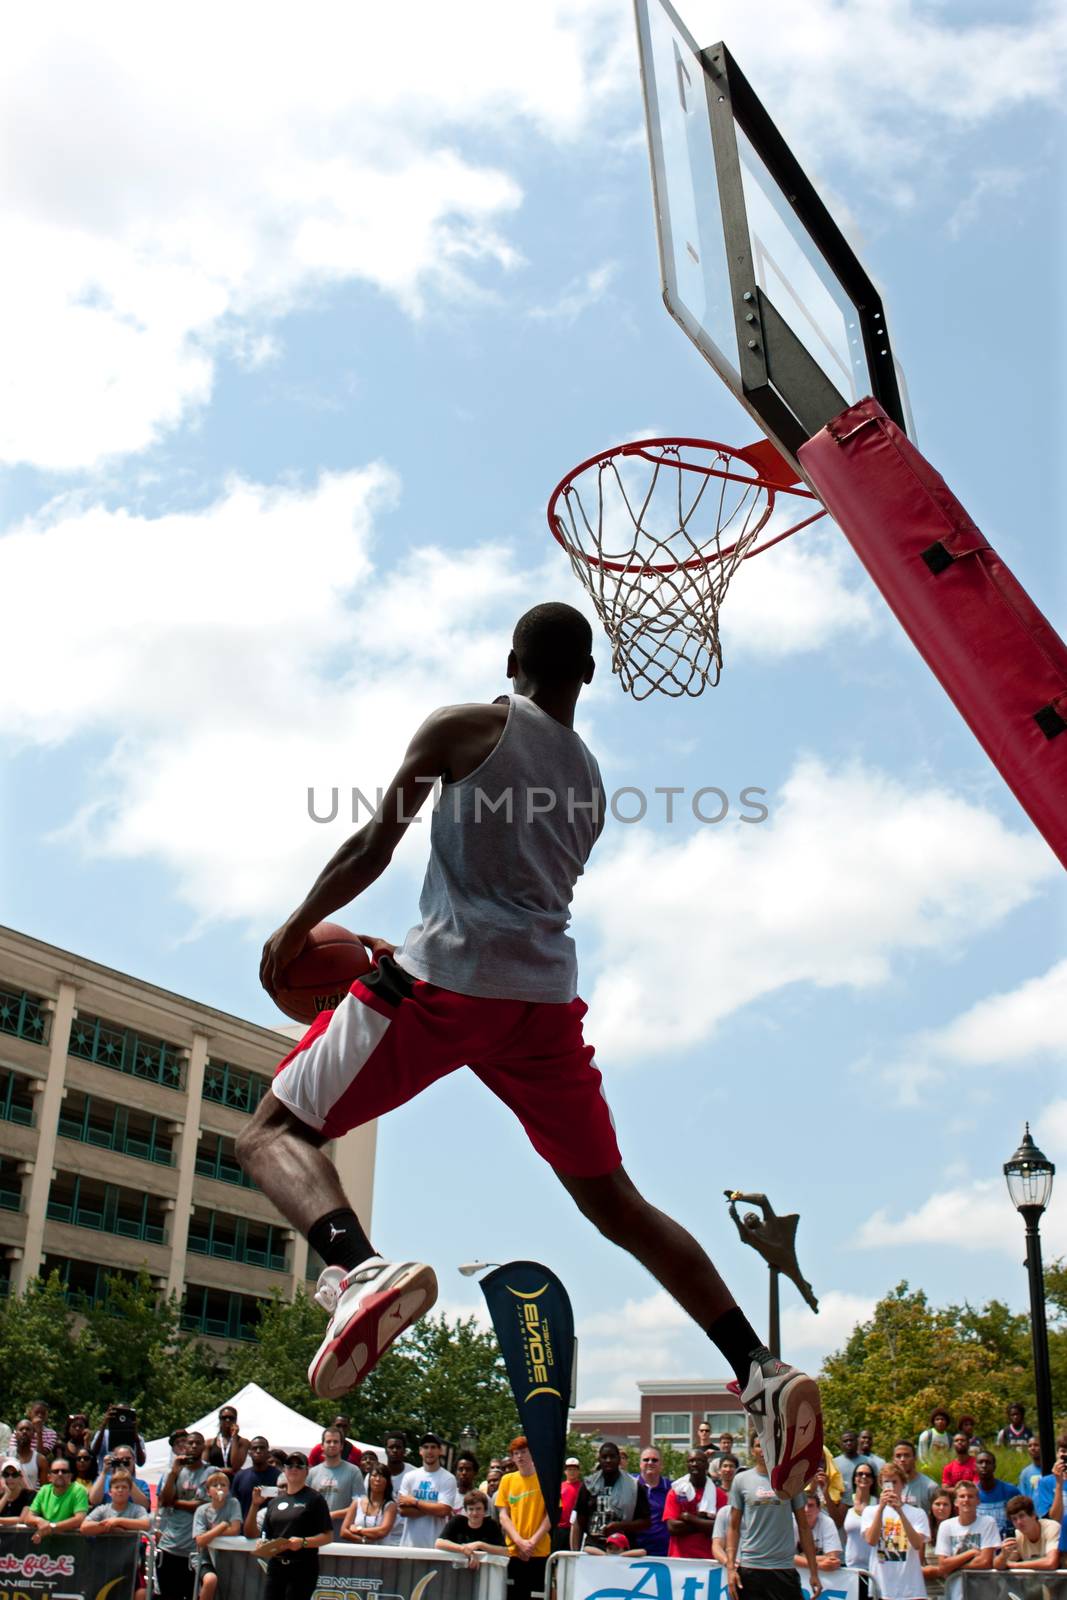 Man Attempts Reverse Jam In Outdoor Slam Dunk Competition by BluIz60